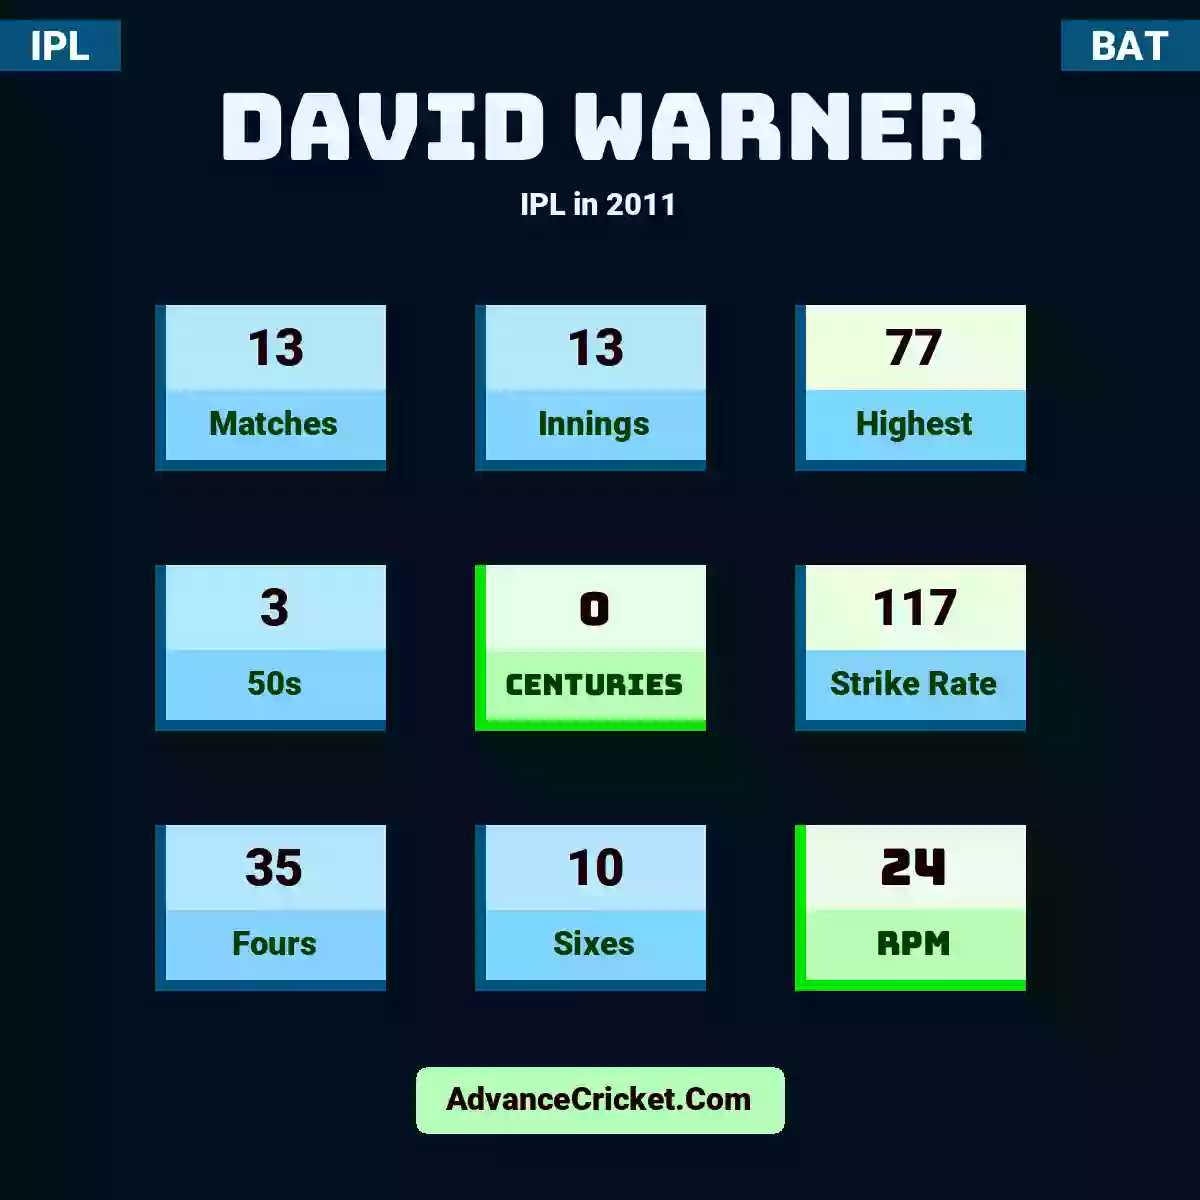 David Warner IPL  in 2011, David Warner played 13 matches, scored 77 runs as highest, 3 half-centuries, and 0 centuries, with a strike rate of 117. D.Warner hit 35 fours and 10 sixes, with an RPM of 24.